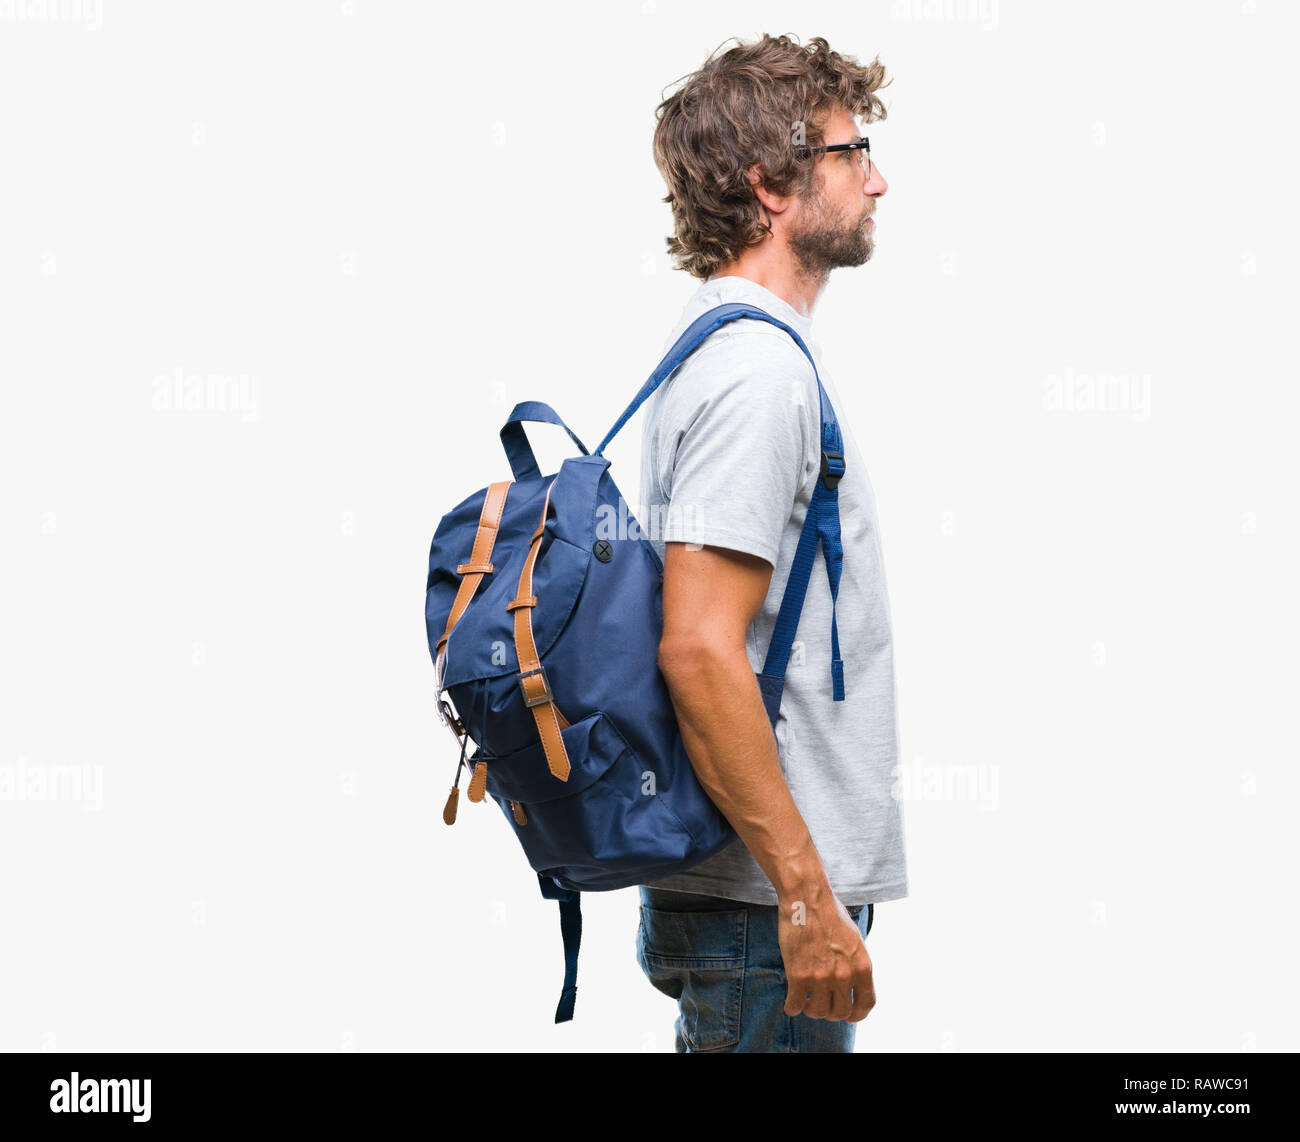 Man wearing backpack Cut Out Stock Images & Pictures - Alamy